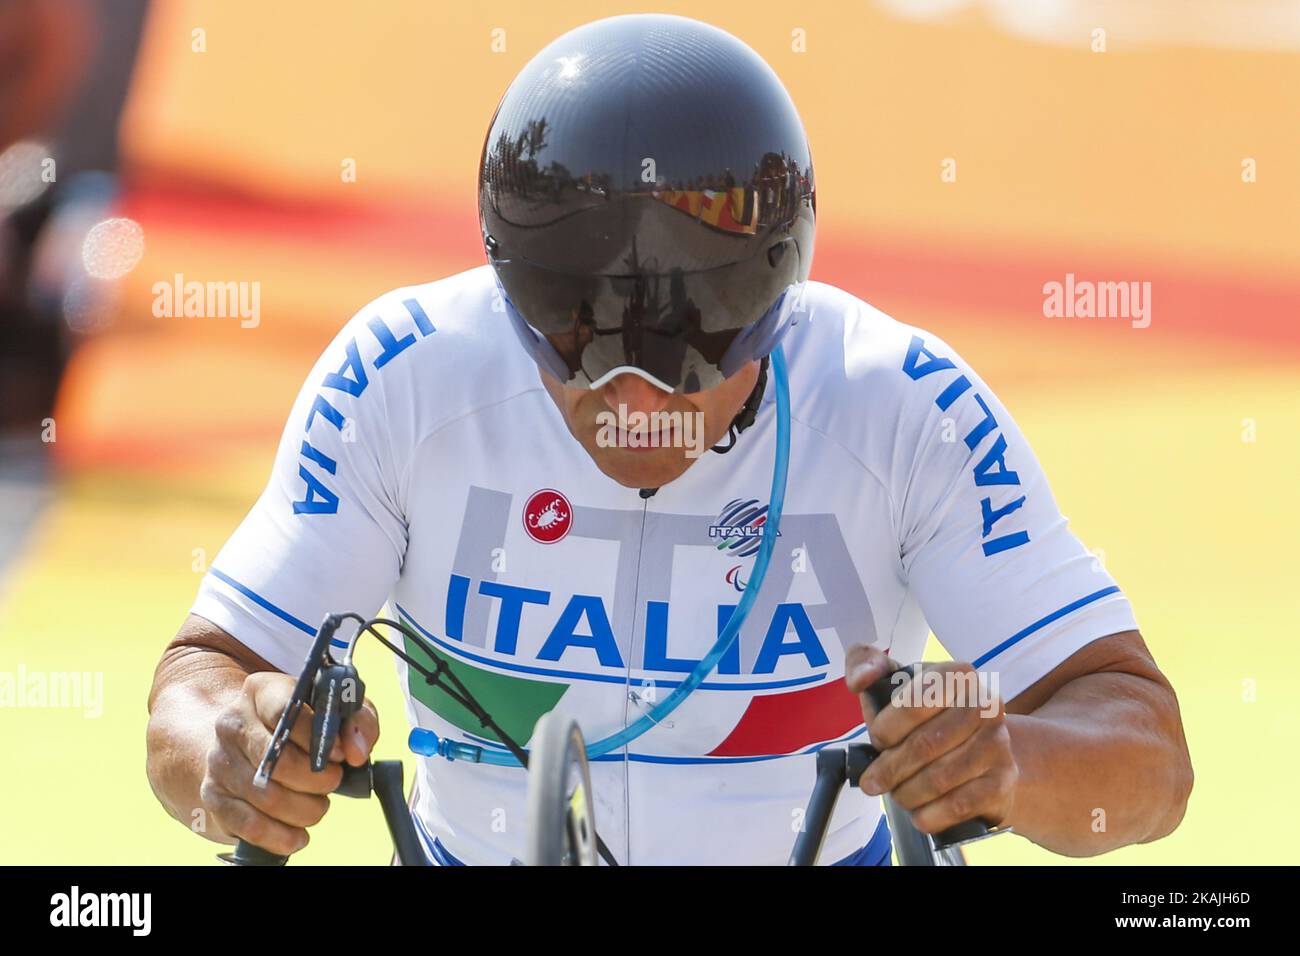 Italy's Alessandro Zanardi competes in the Men's Time Trial H5 heat on day 7 of the Rio 2016 Paralympic Games at the Olympic Stadium on September 14, 2016 in Rio de Janeiro, Brazil. *** Please Use Credit from Credit Field *** Stock Photo